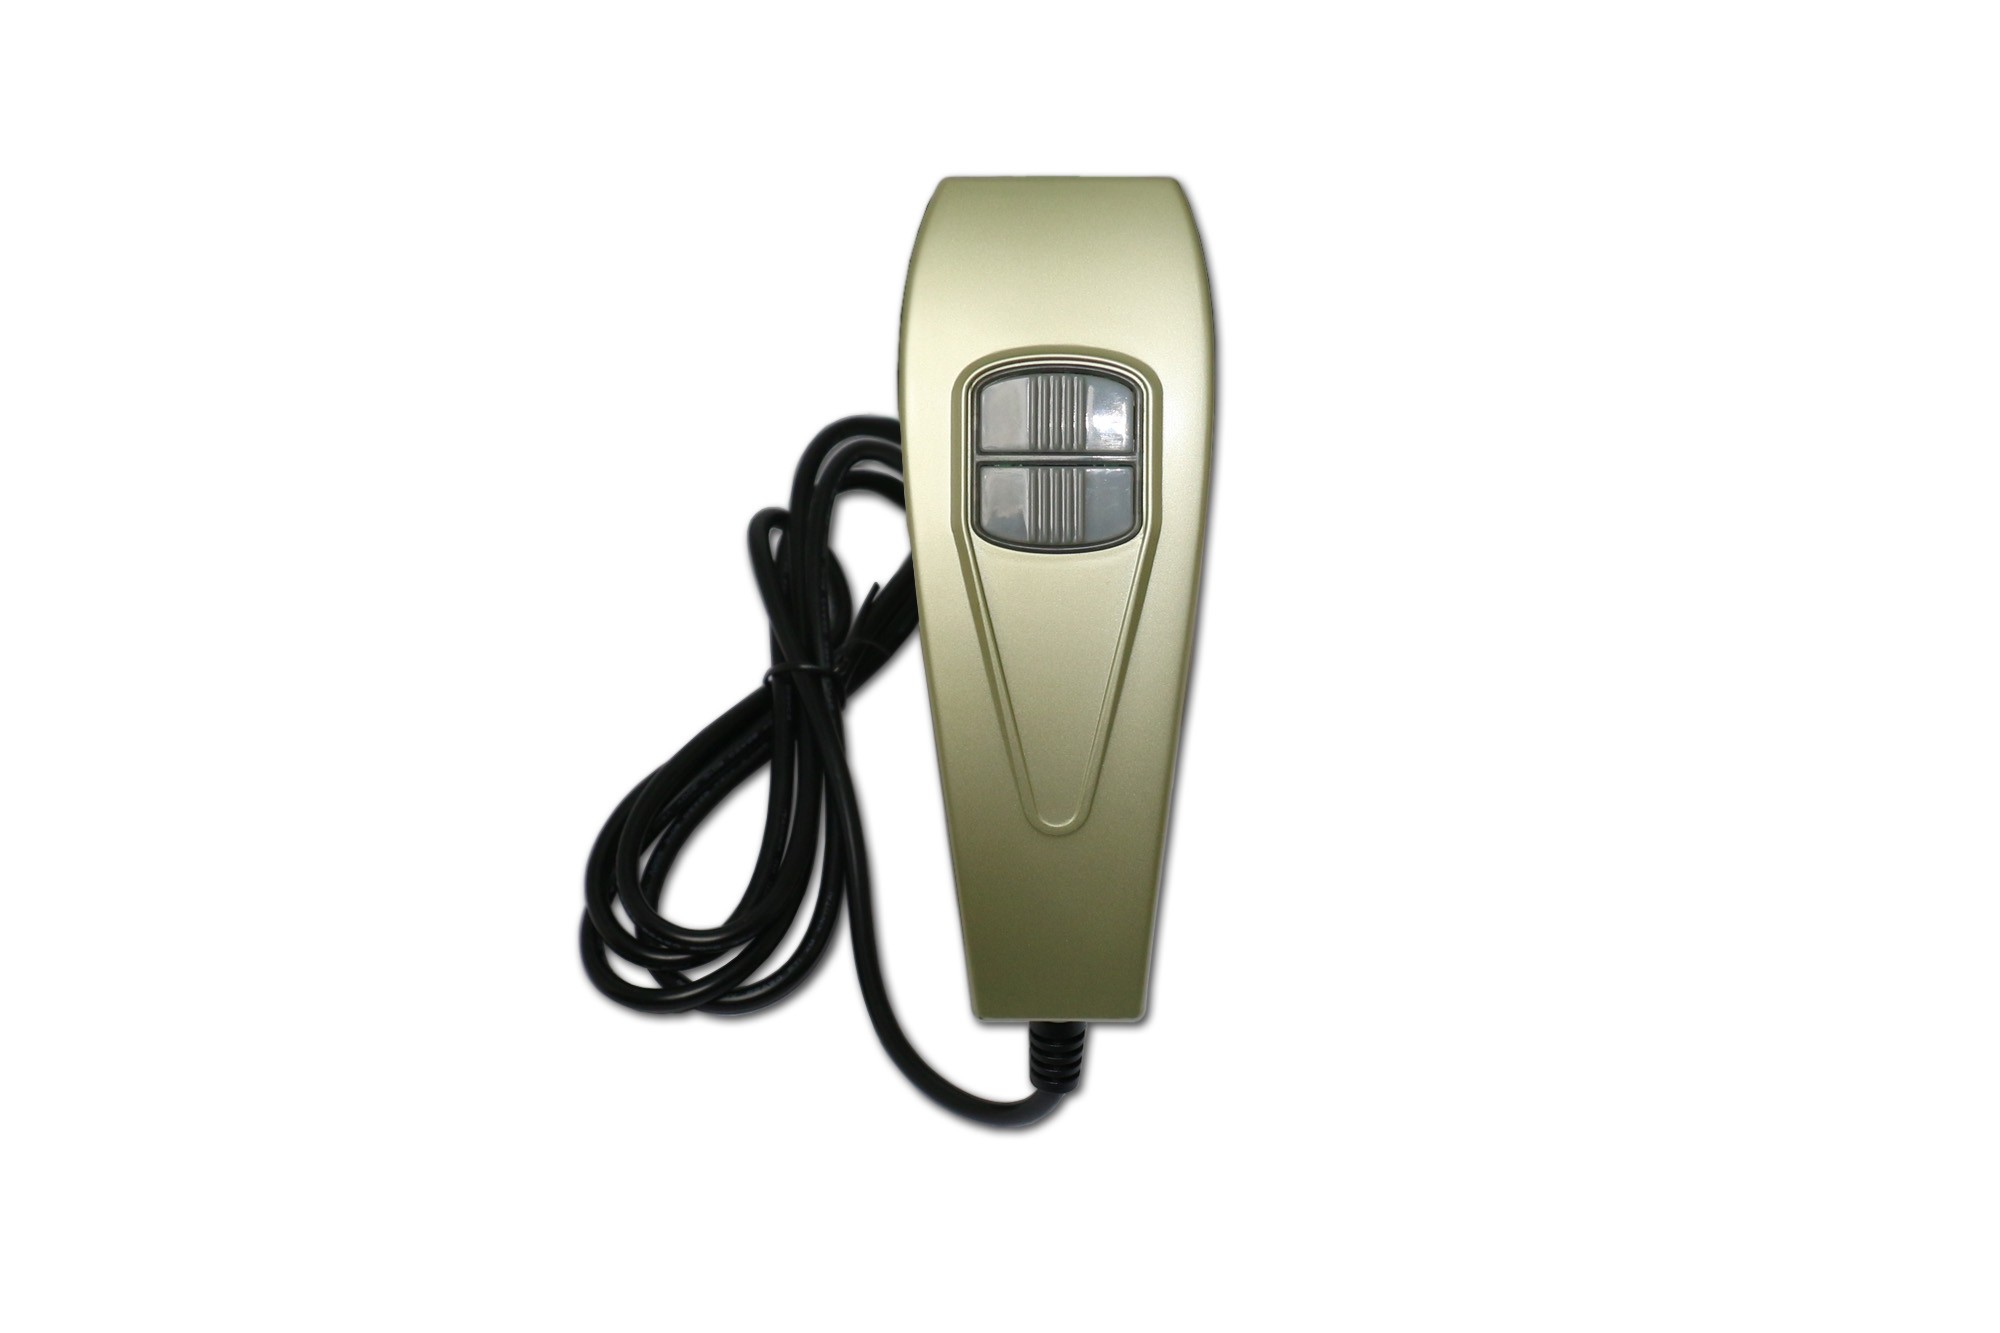 Wired handset remote control for single motor